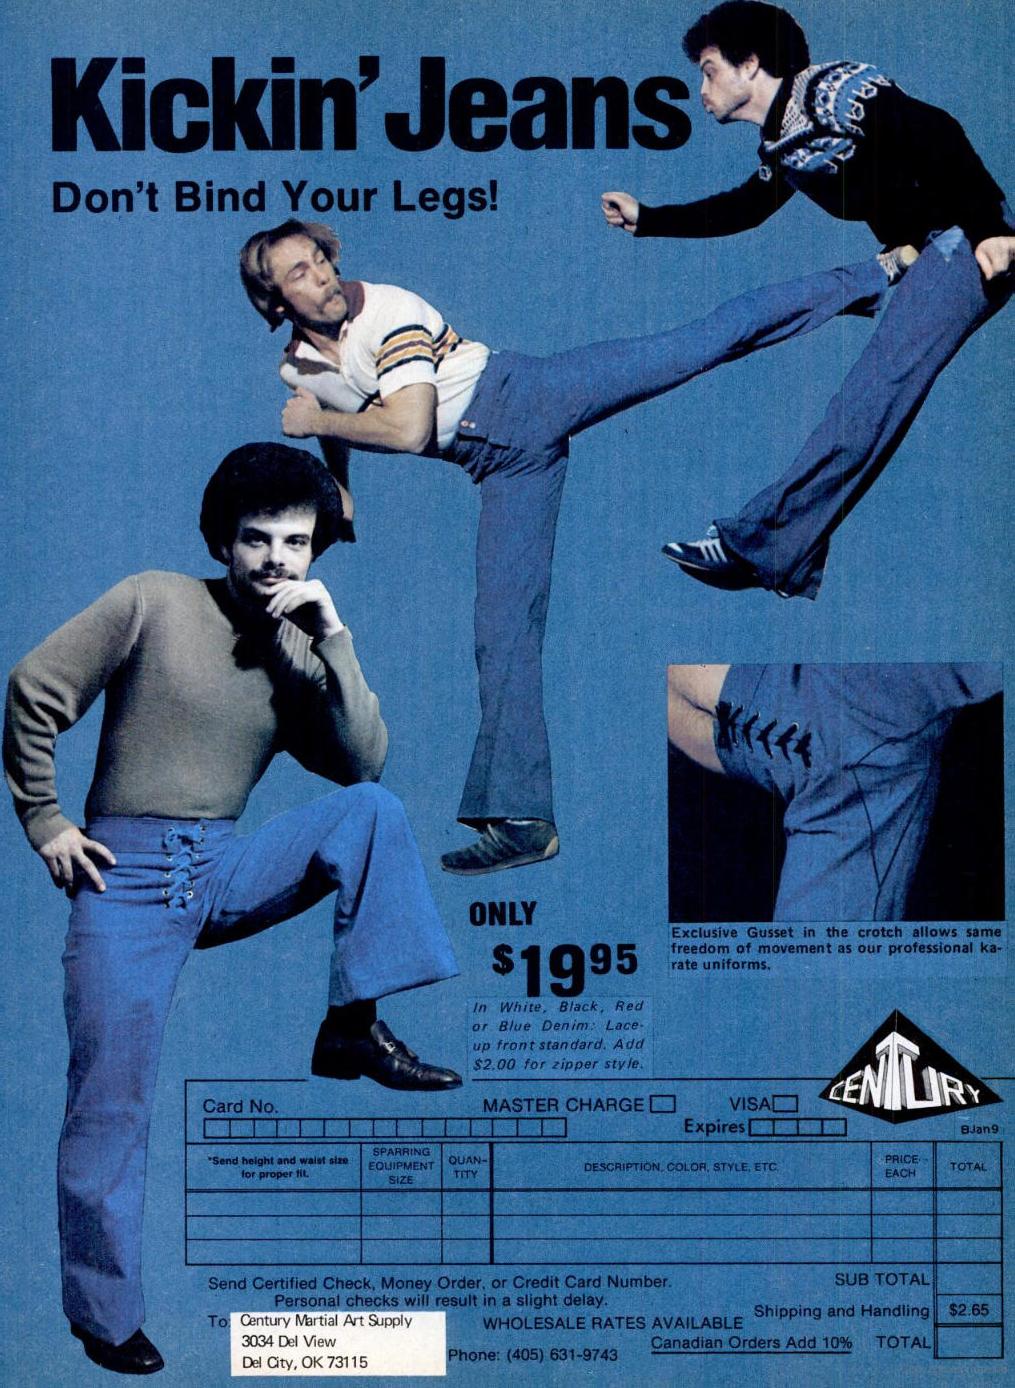 The Essential Action Jeans – Funny Kickn’ Jeans Ads From the 1970s and ...